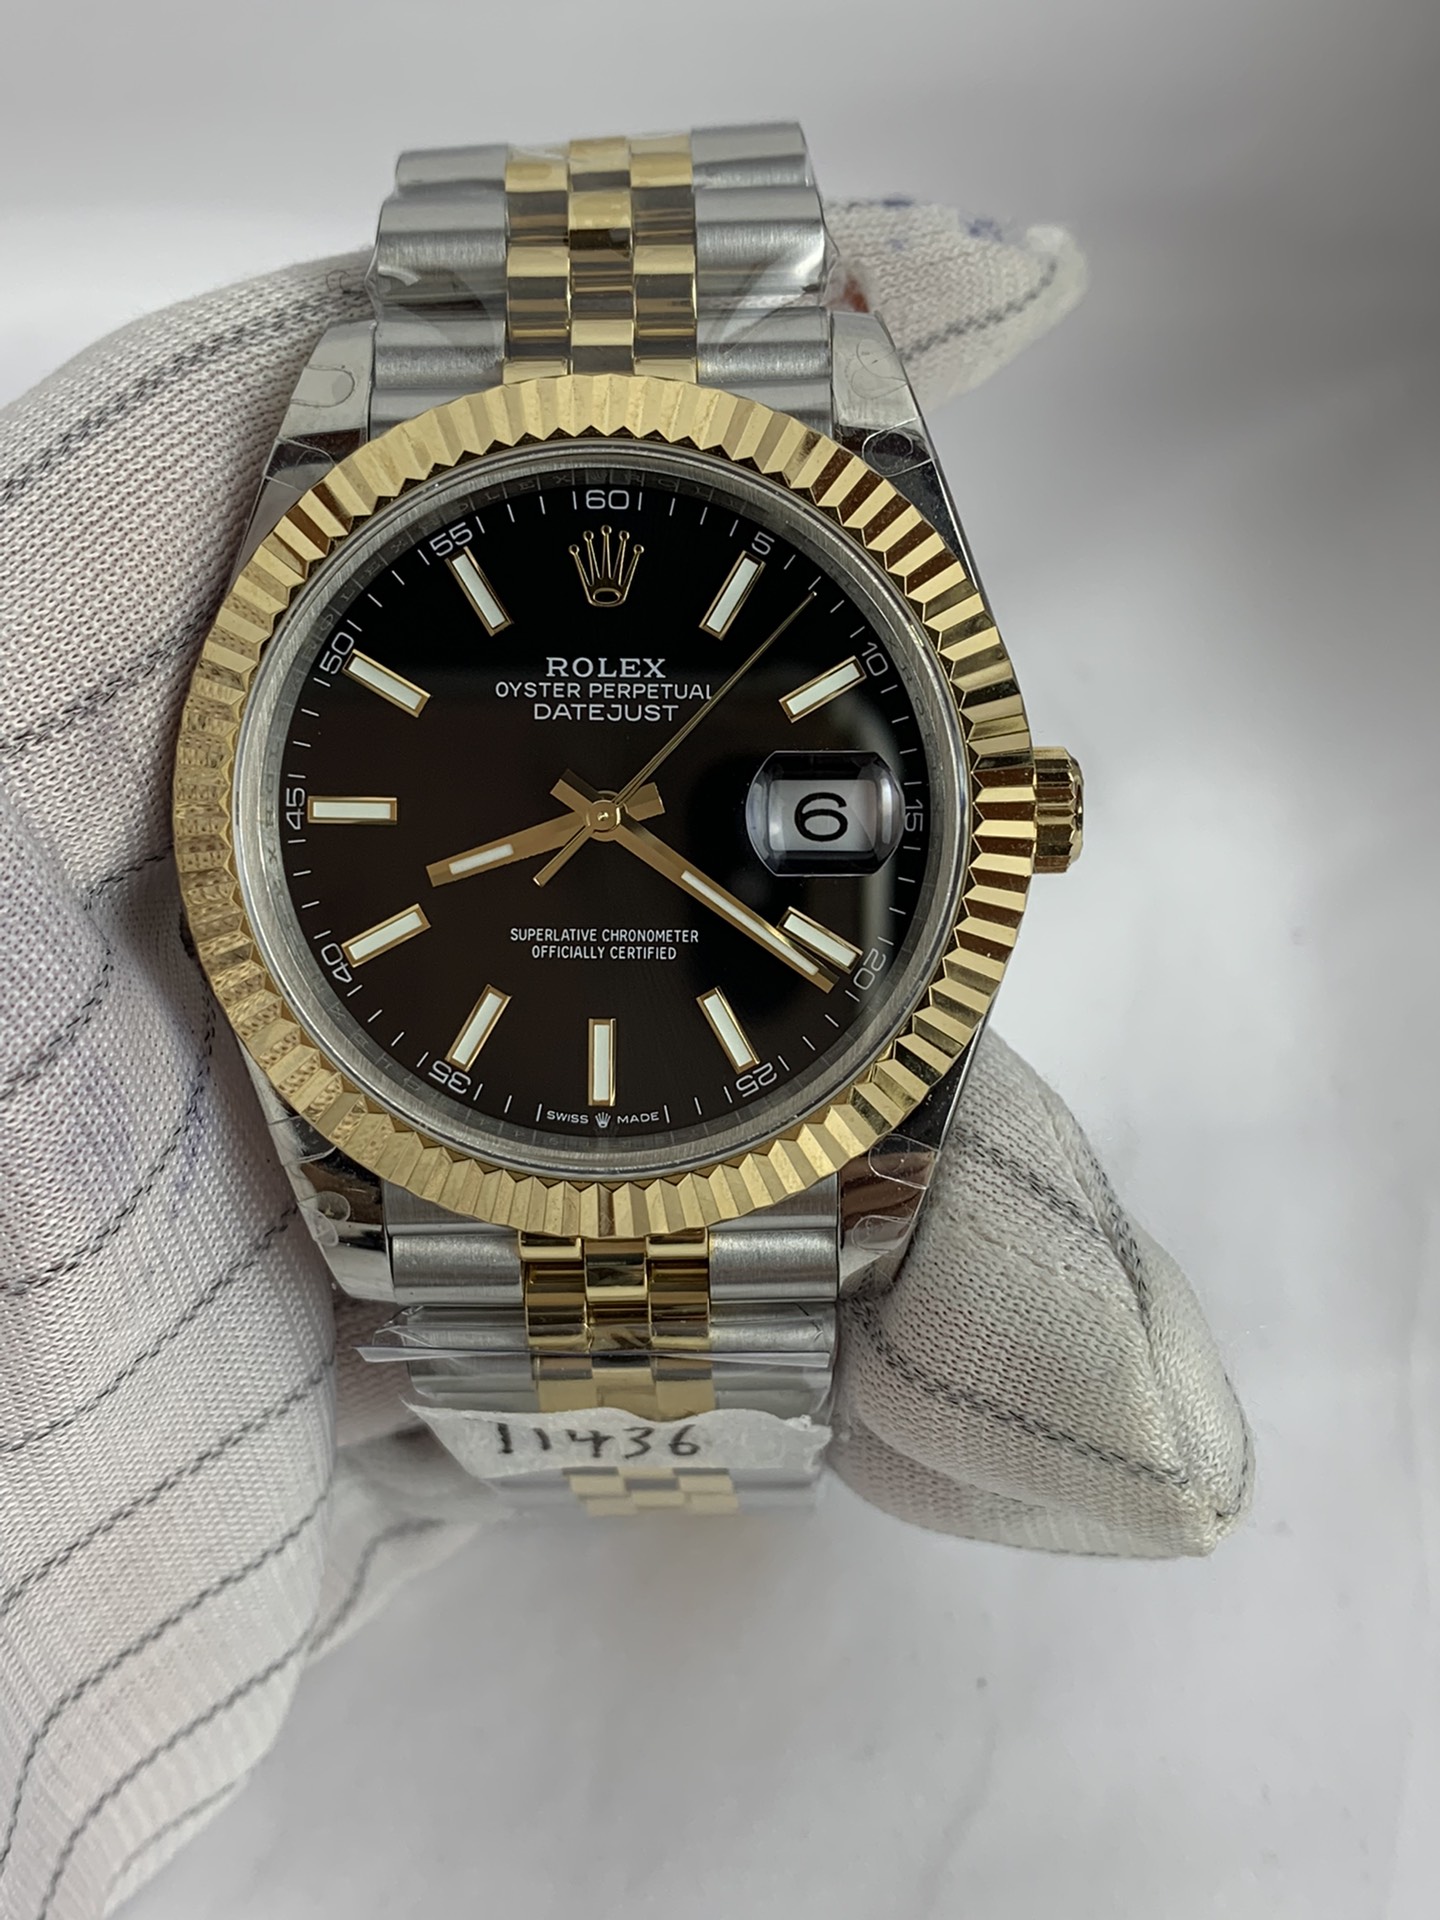 Datejust 41mm : RepTime